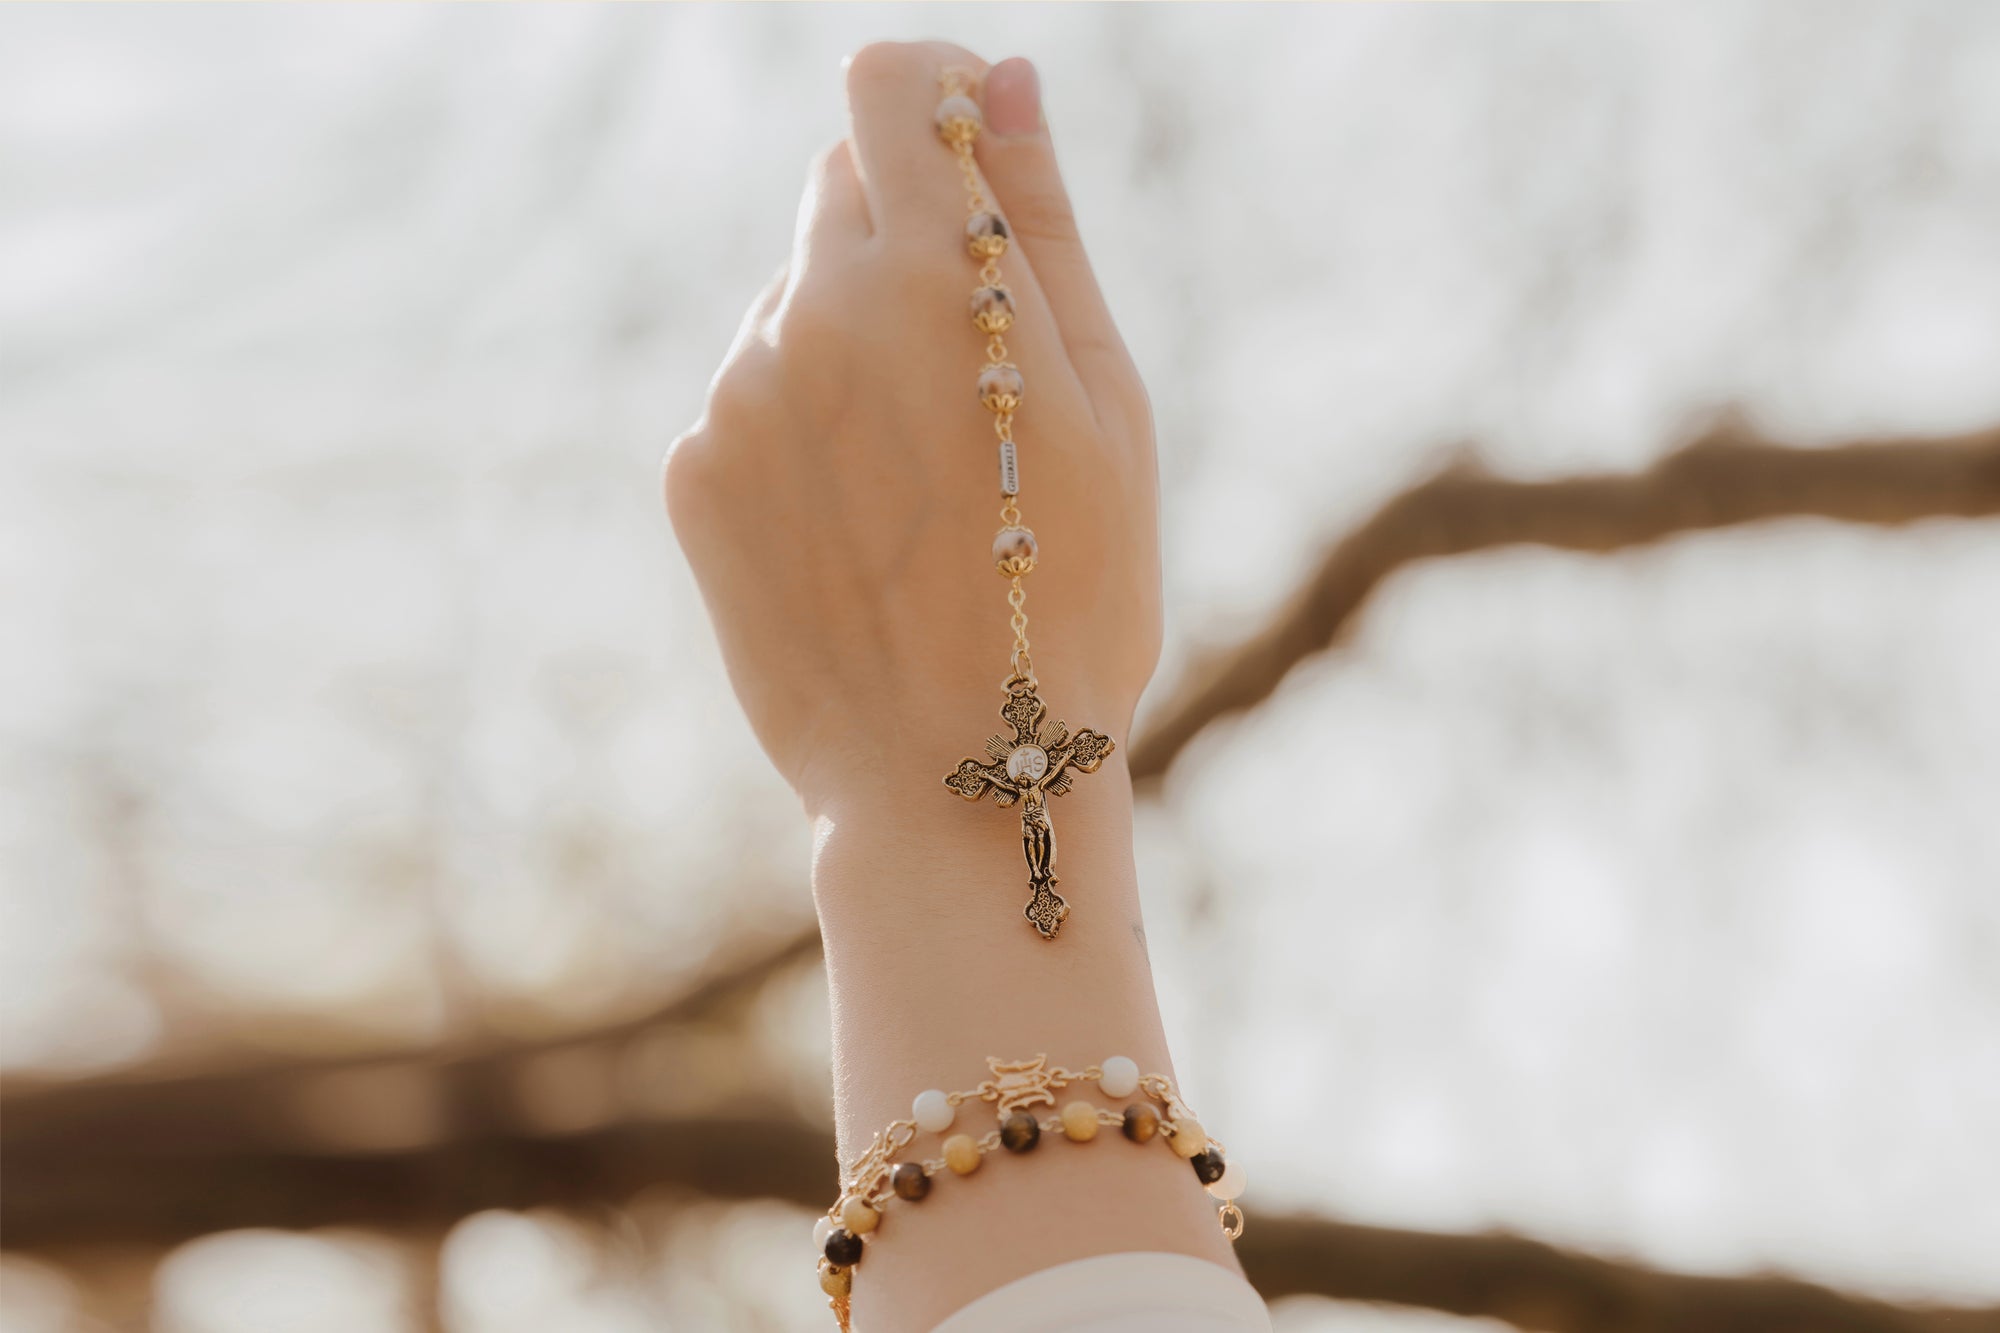 The Holy Rosary and the Immaculate Heart of Mary